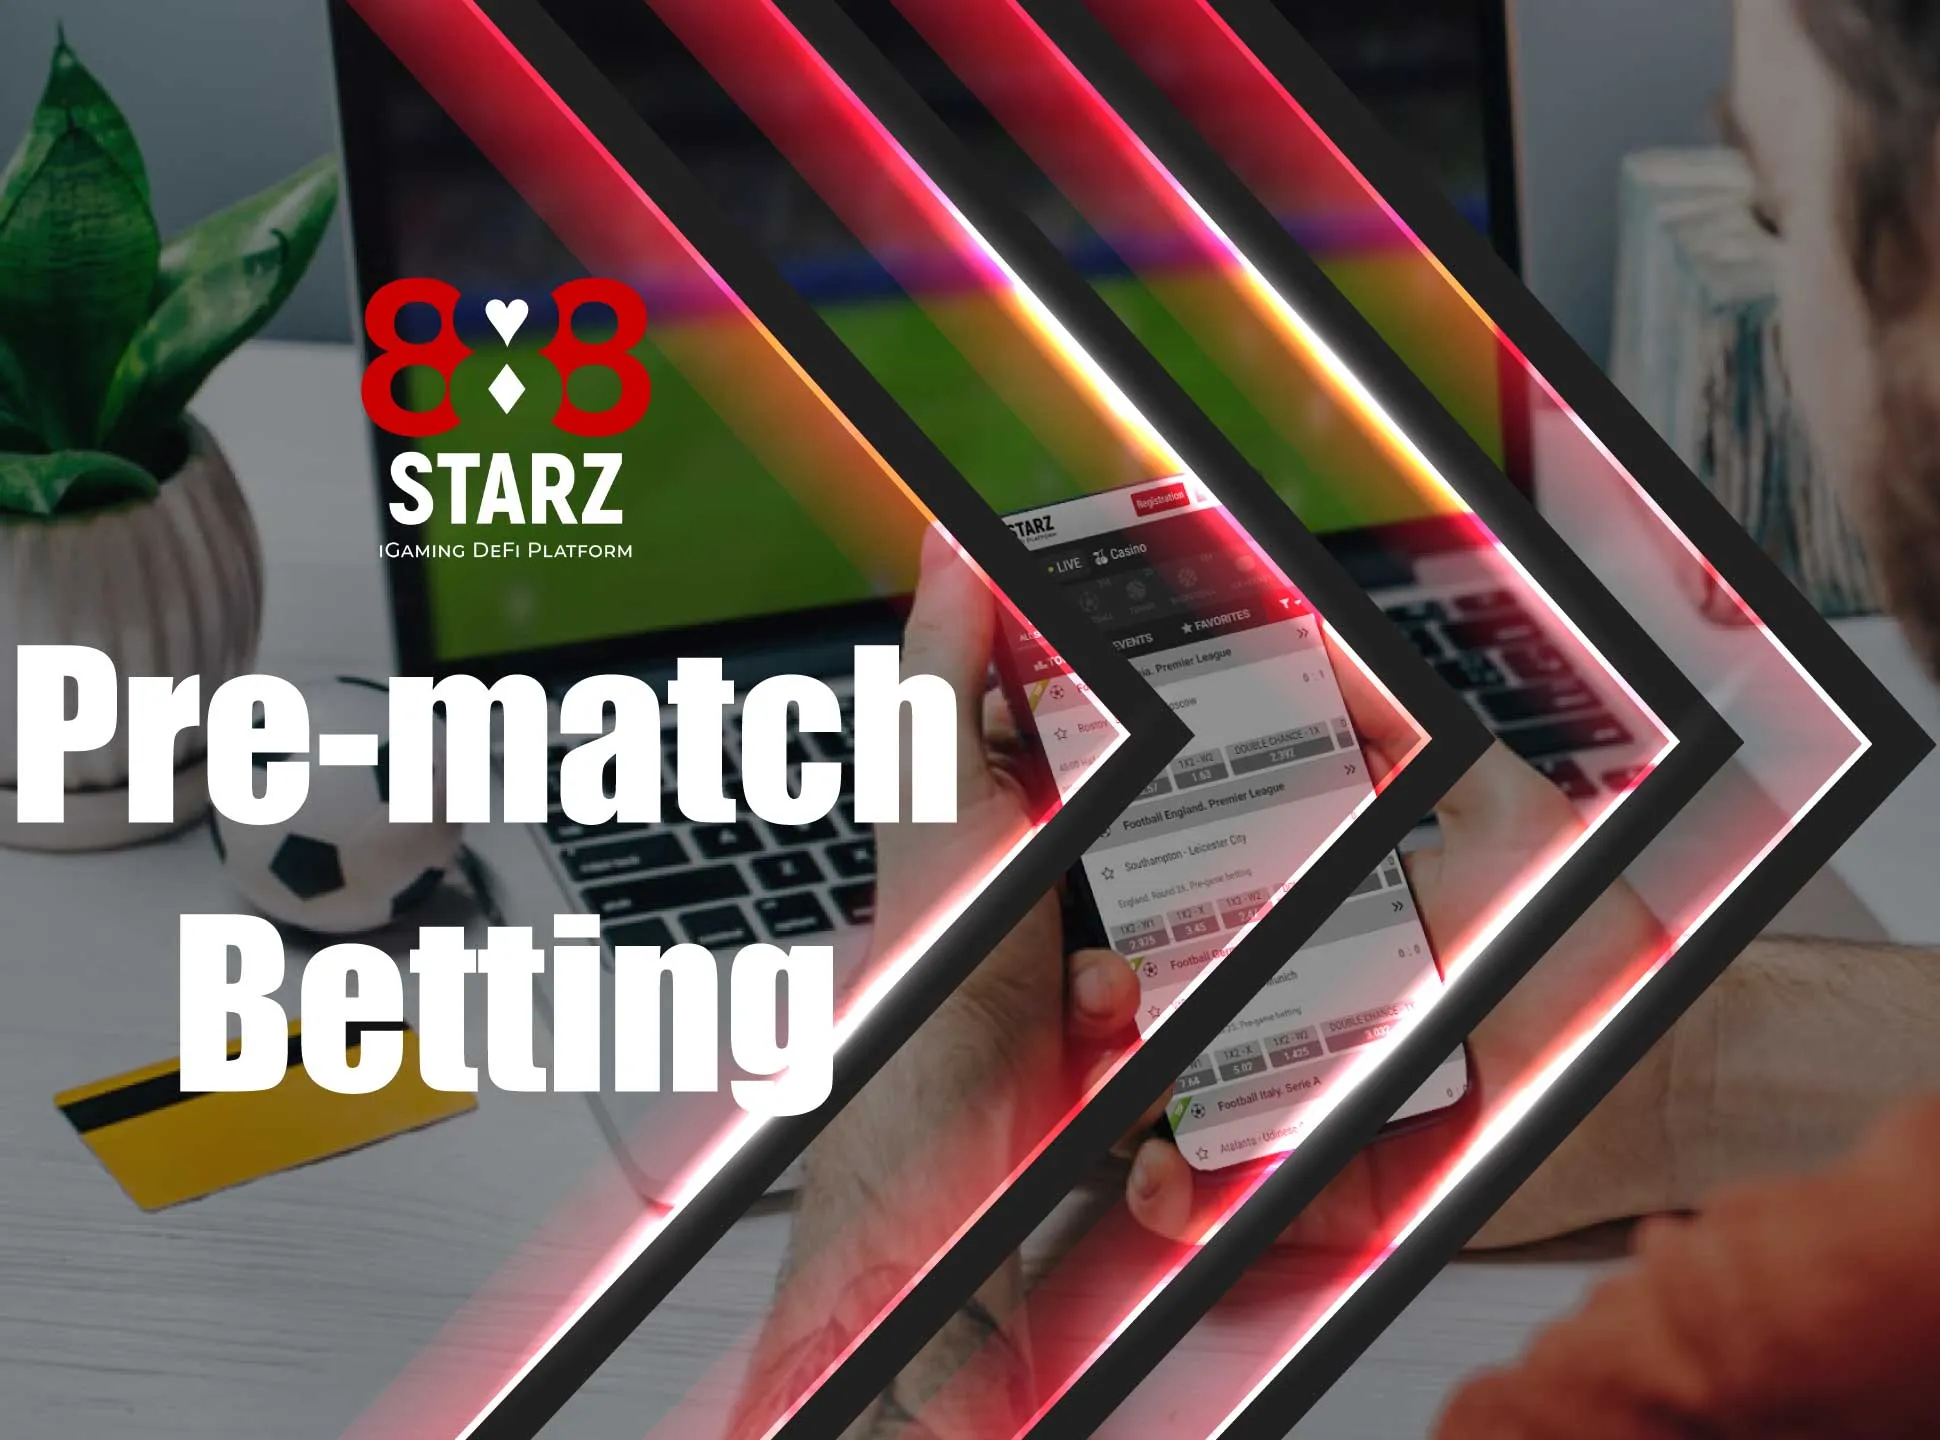 Prematch betting allows you to bet before the match starts.